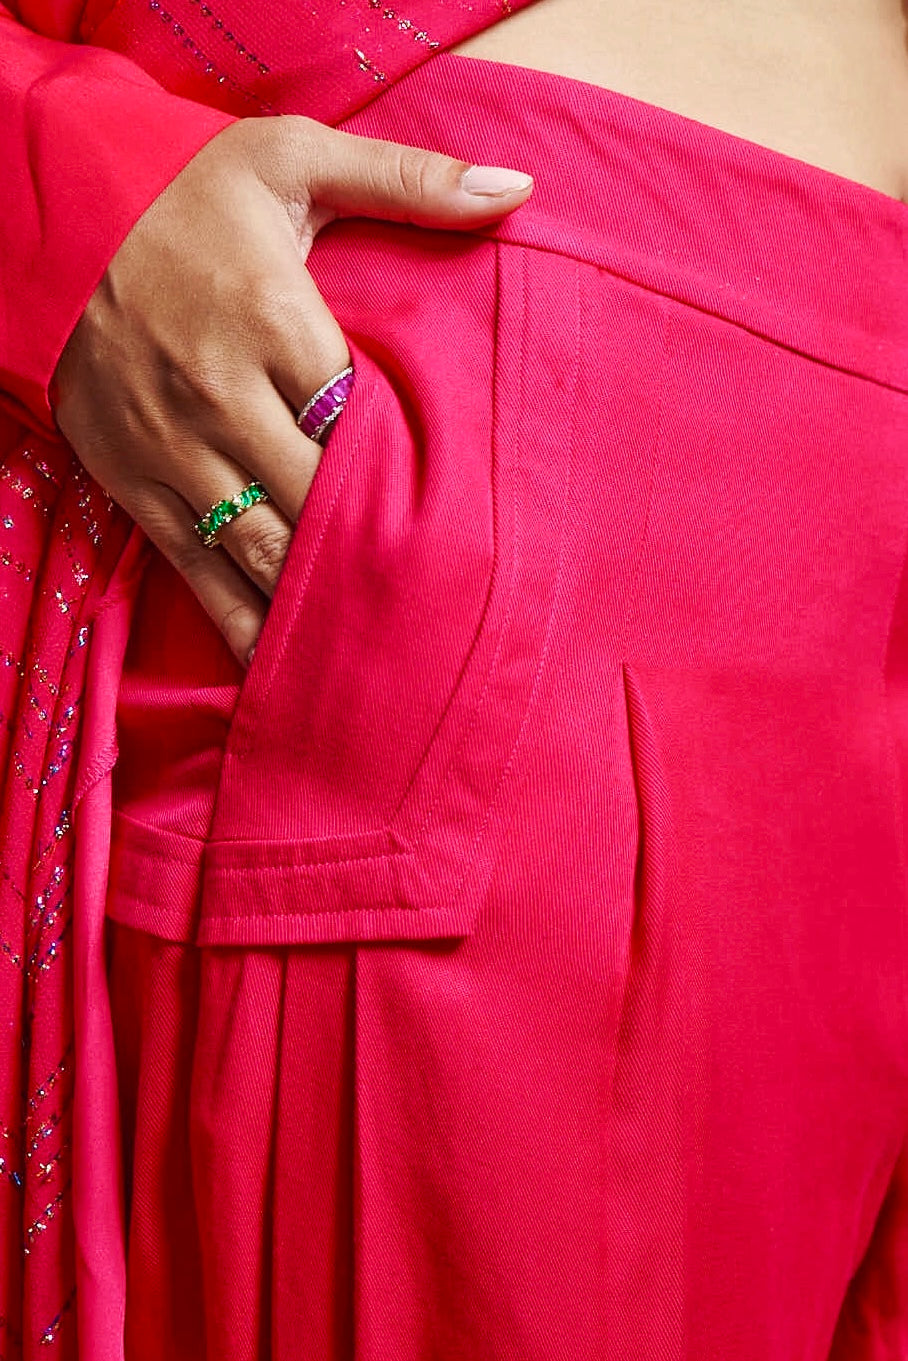 HOT PINK TWILL PLEATED PANTS